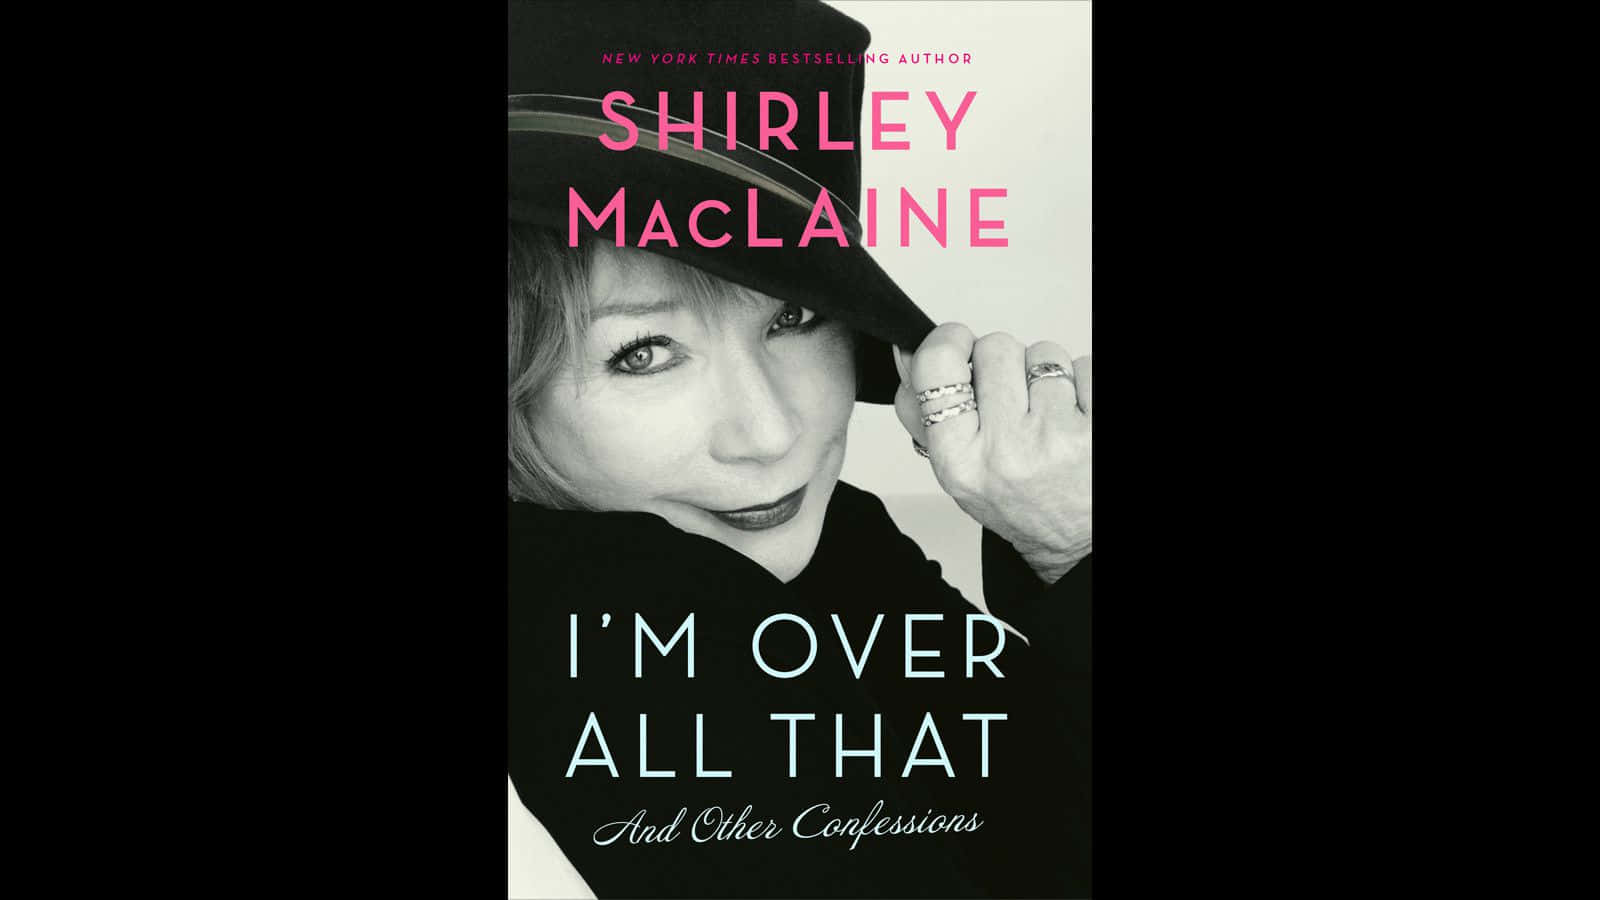 Shirley Maclaine I'm Over All That Book Cover Wallpaper